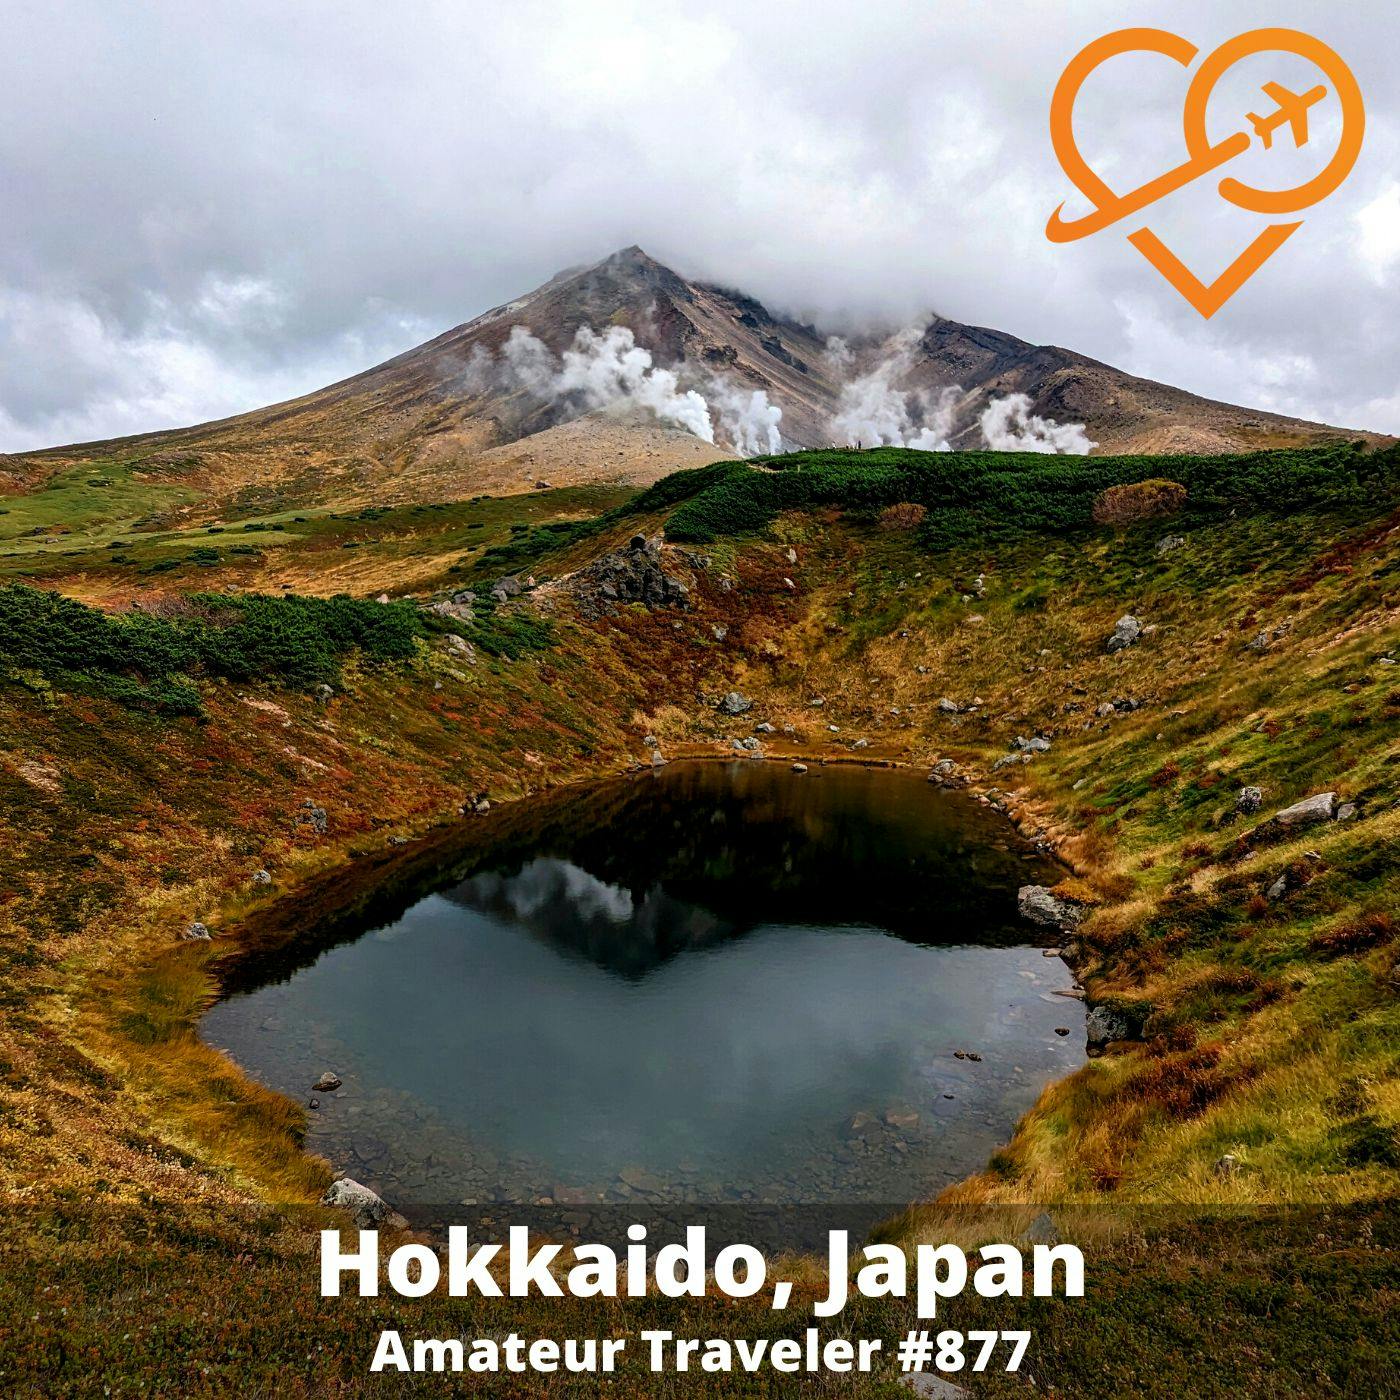 AT#877 - Travel to the Island of Hokkaido in Japan